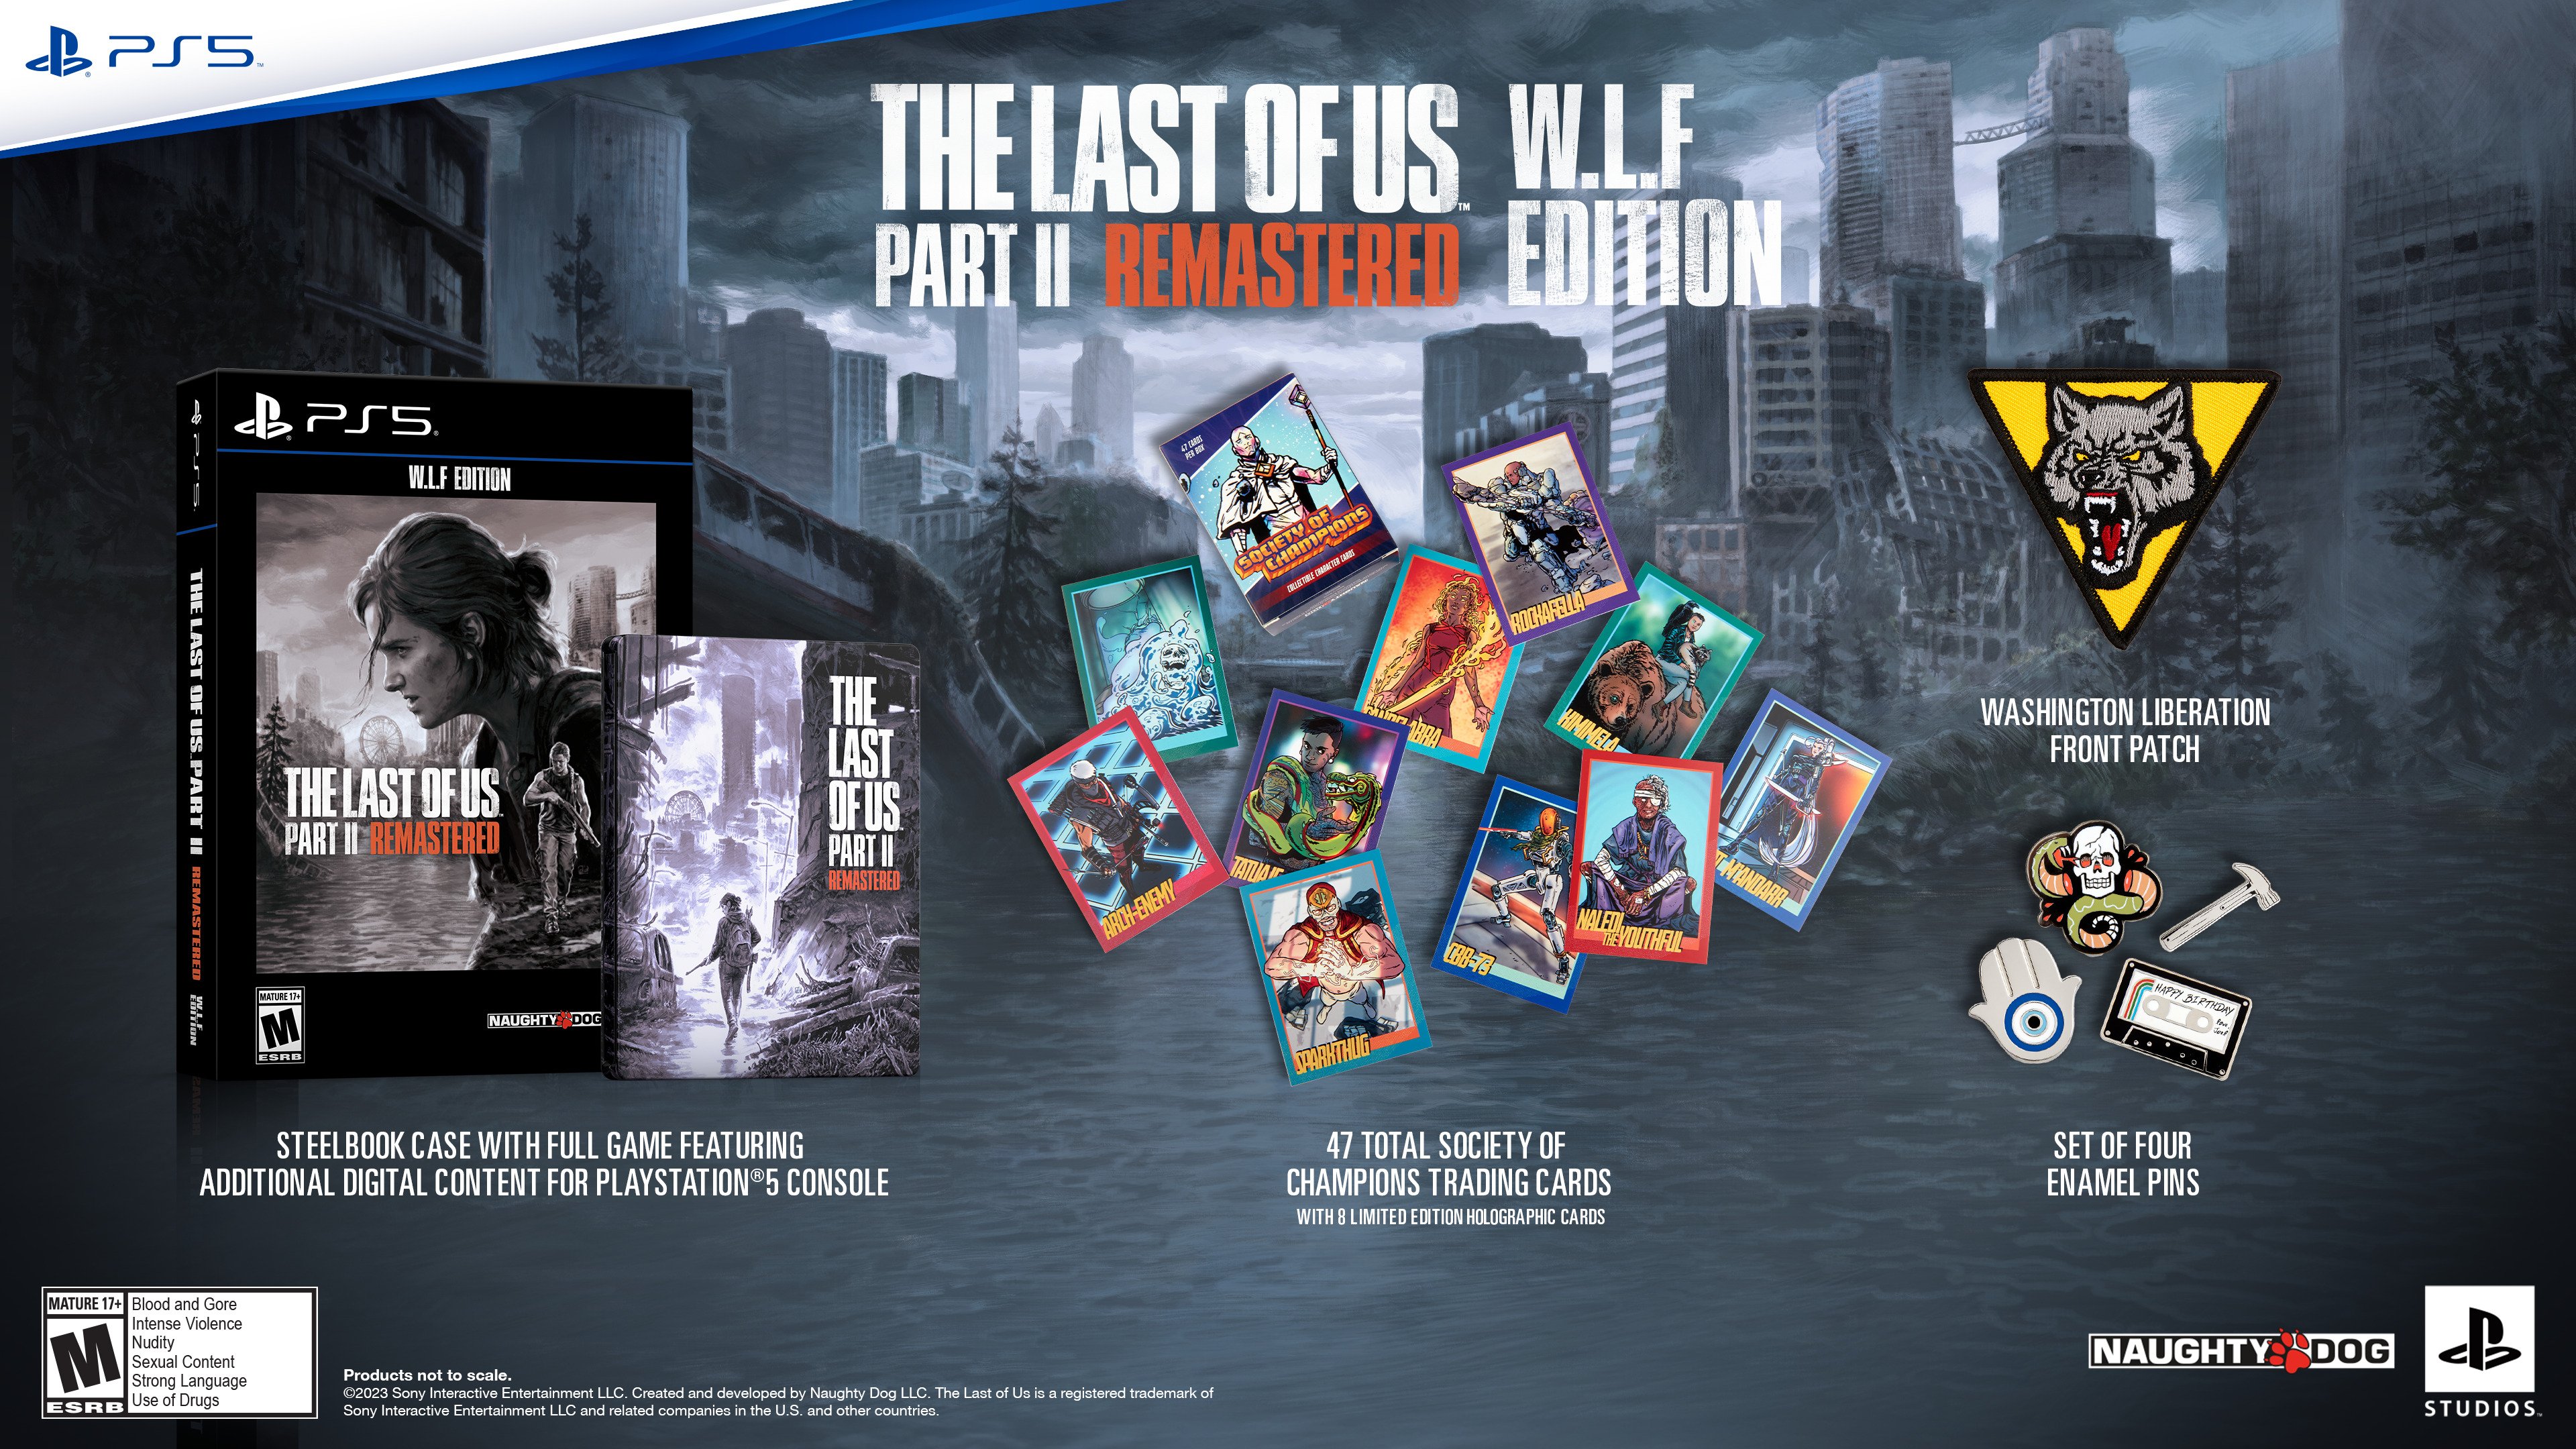 The Last of Us Part 2 Remastered officially announced for PS5, upgrade path detailed | VGC